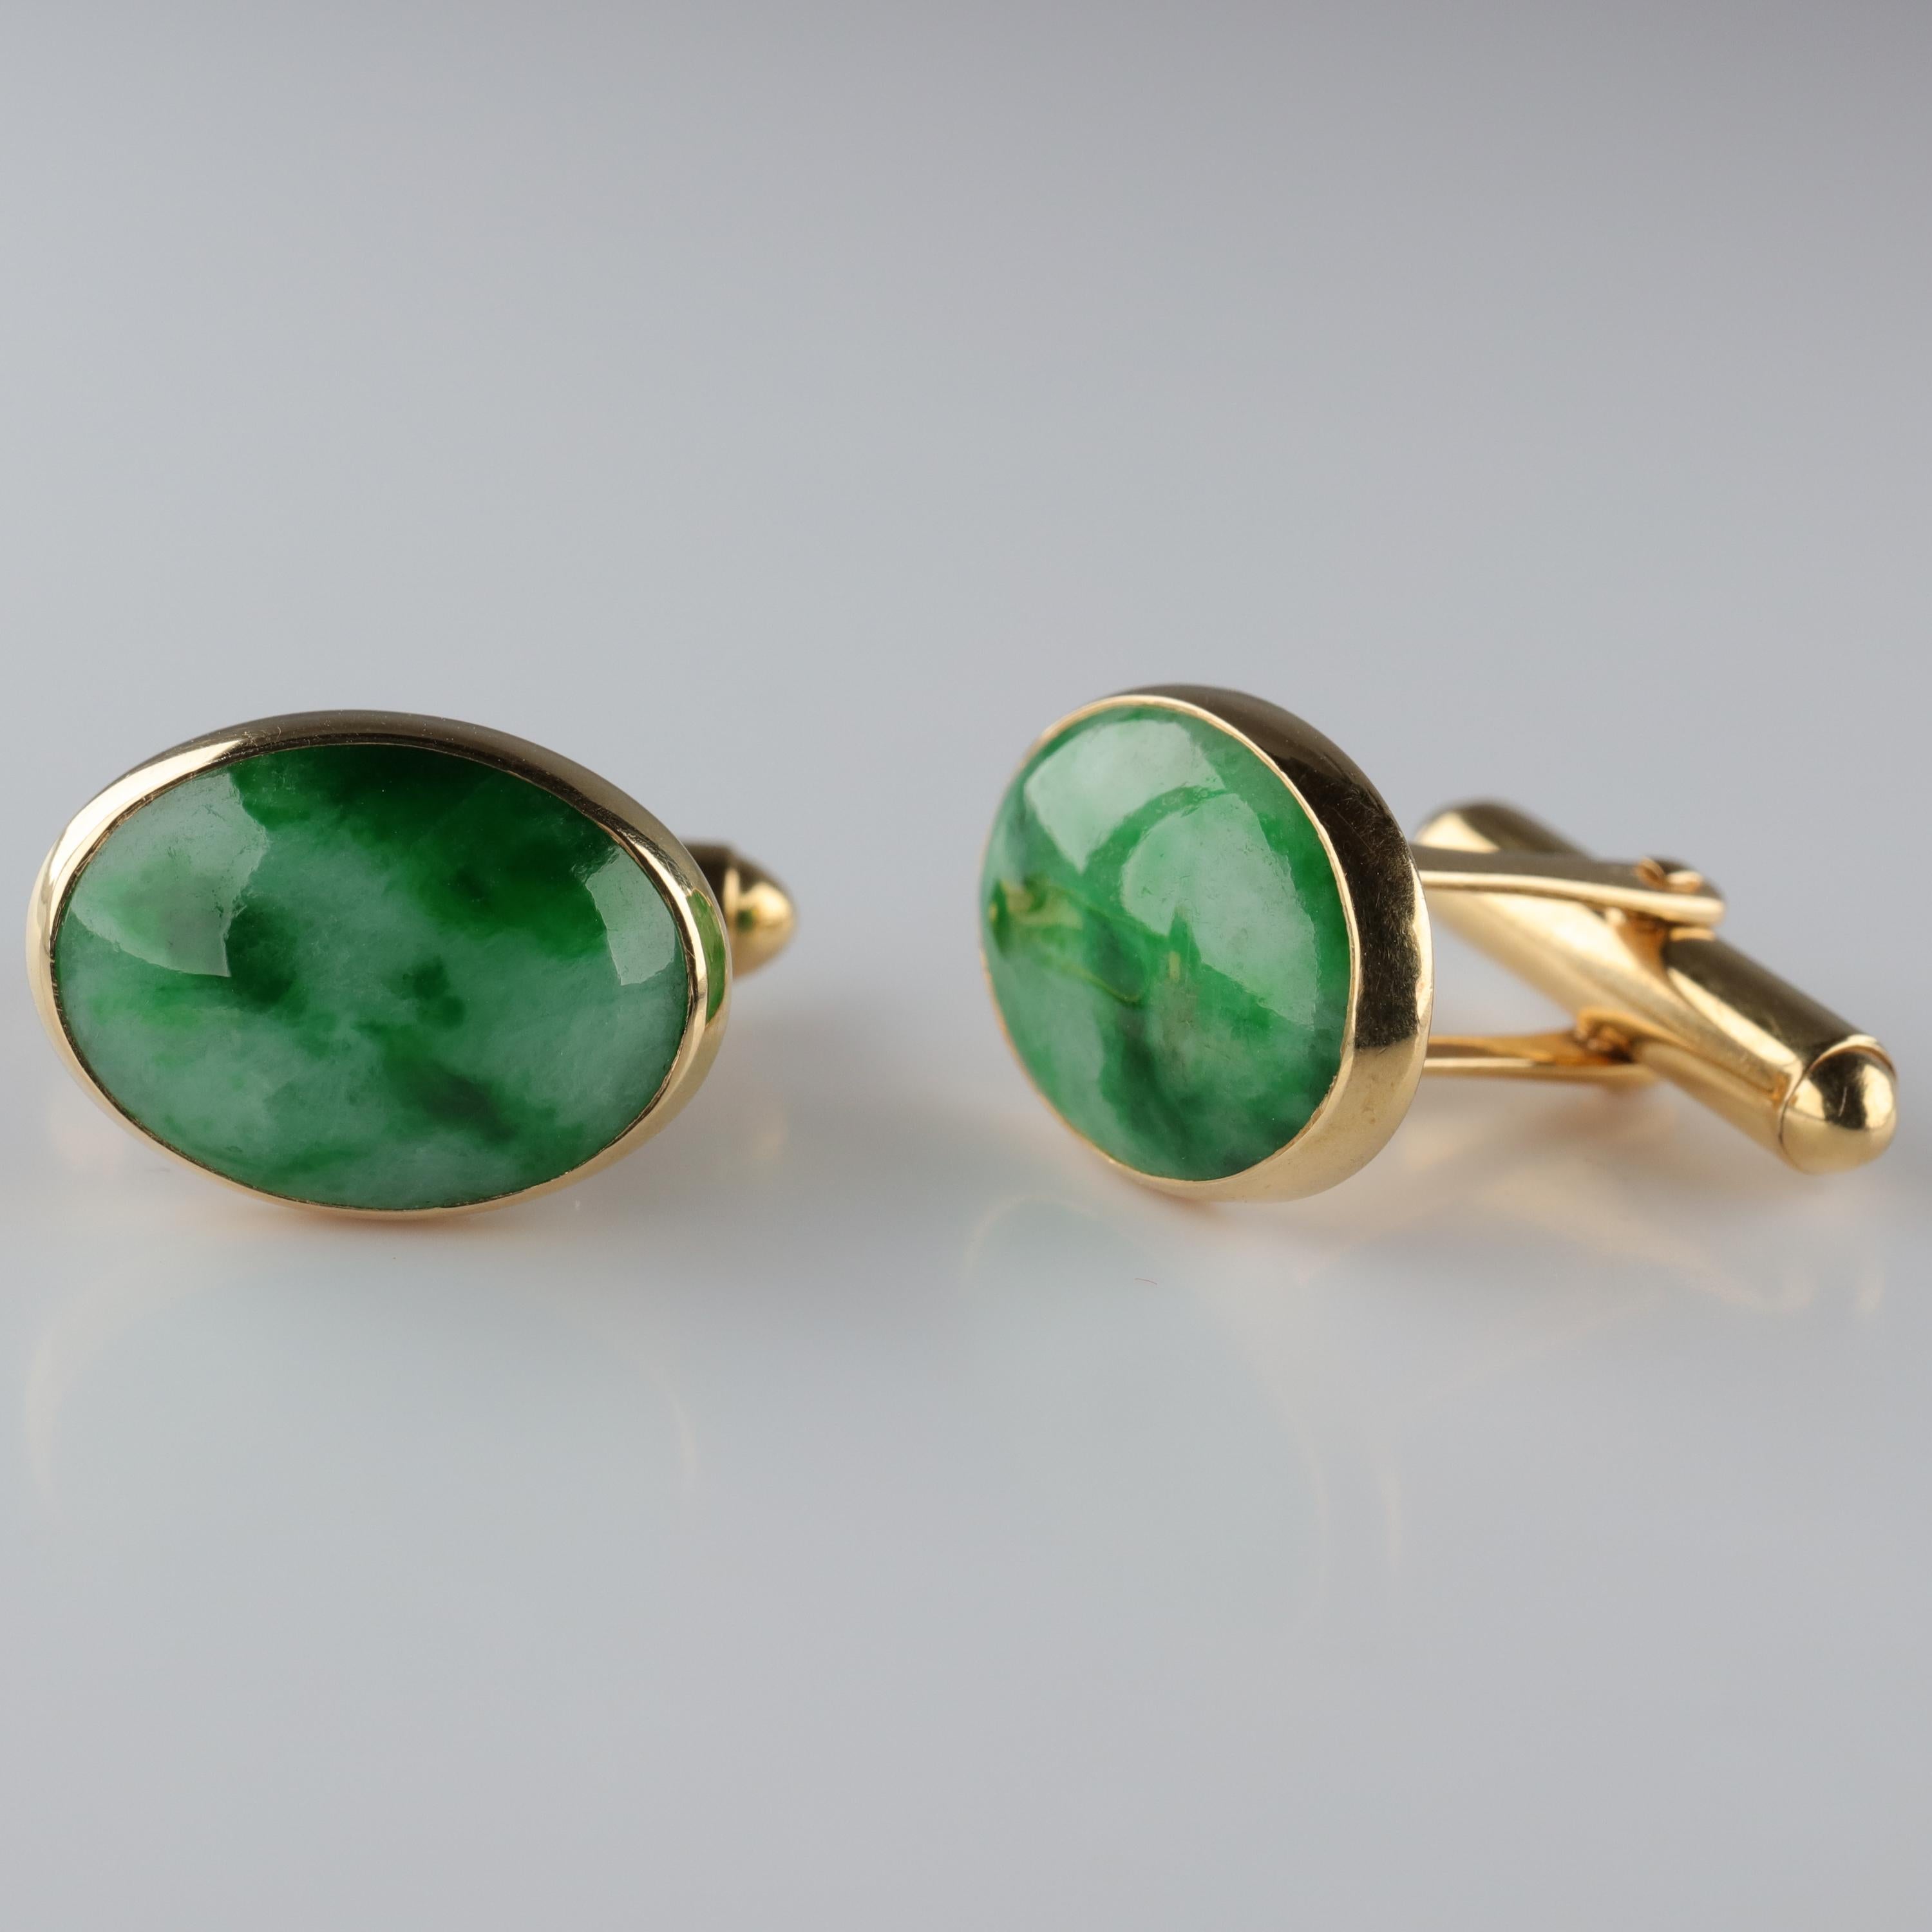 These sleek, timeless mid-century cufflinks feature a pair of natural and untreated mottled jadeite jade cabochons with a pale green body color streaked with slender ribbons of vibrant emerald green. 